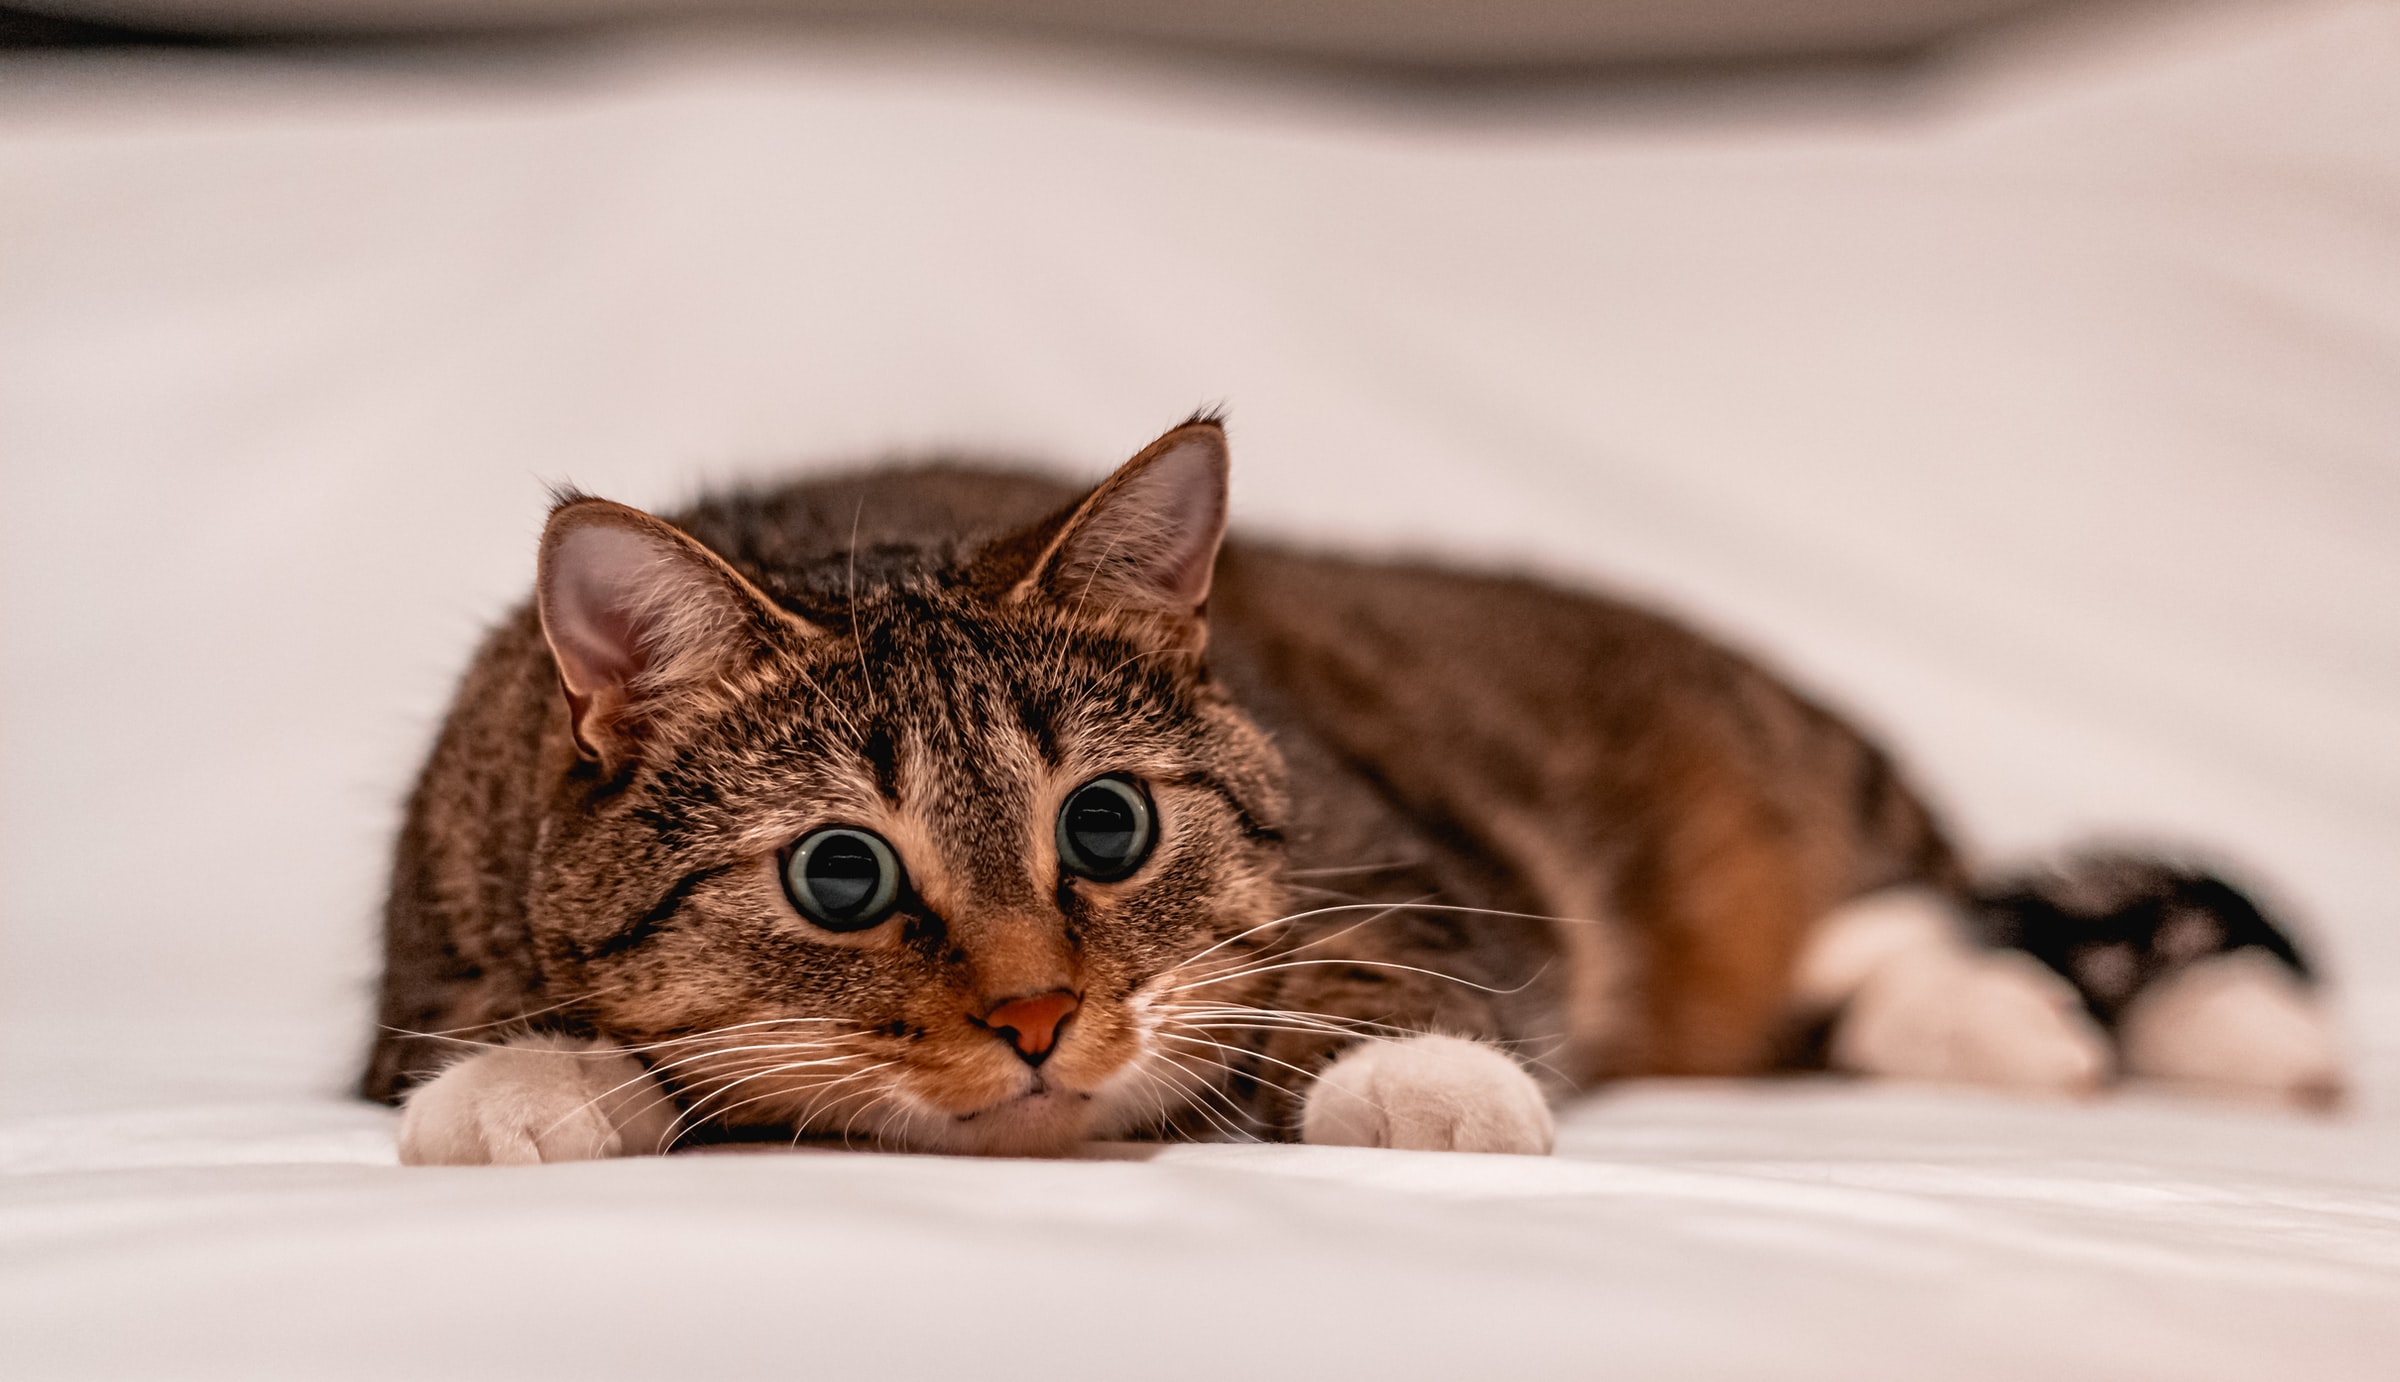 Striped cat with wide eyes laying on white cloth